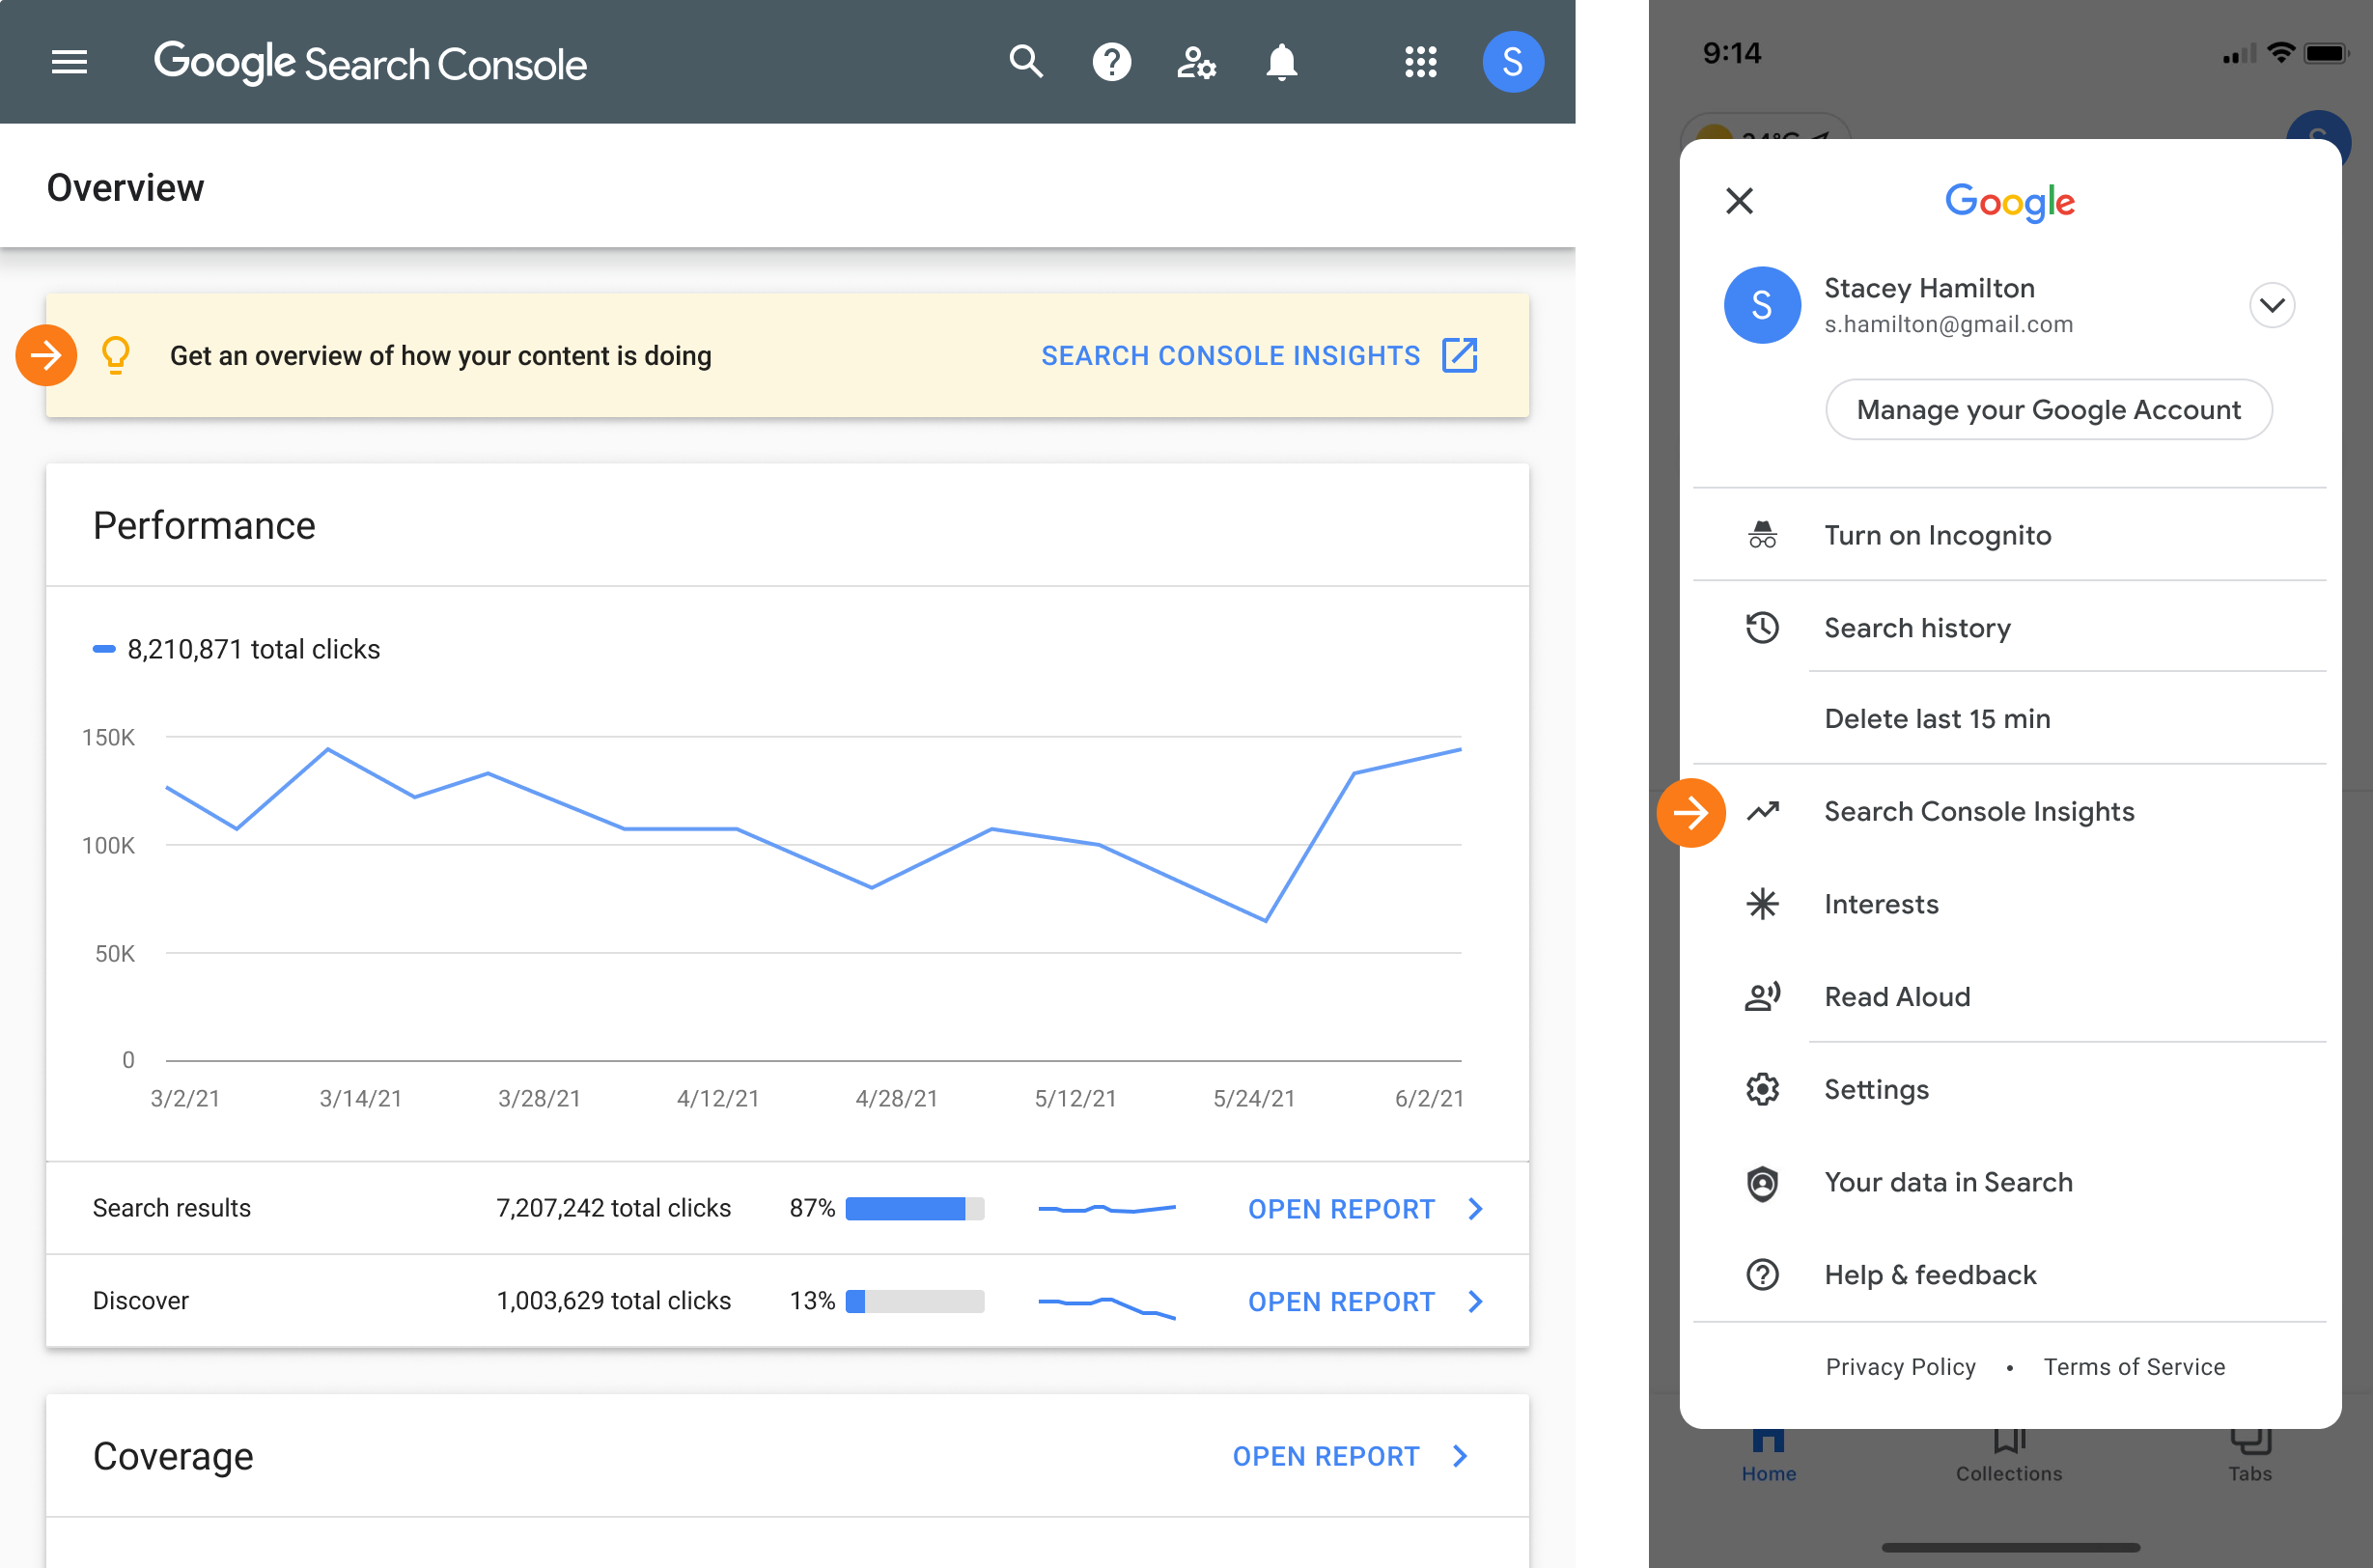 Search Console Insights entry points